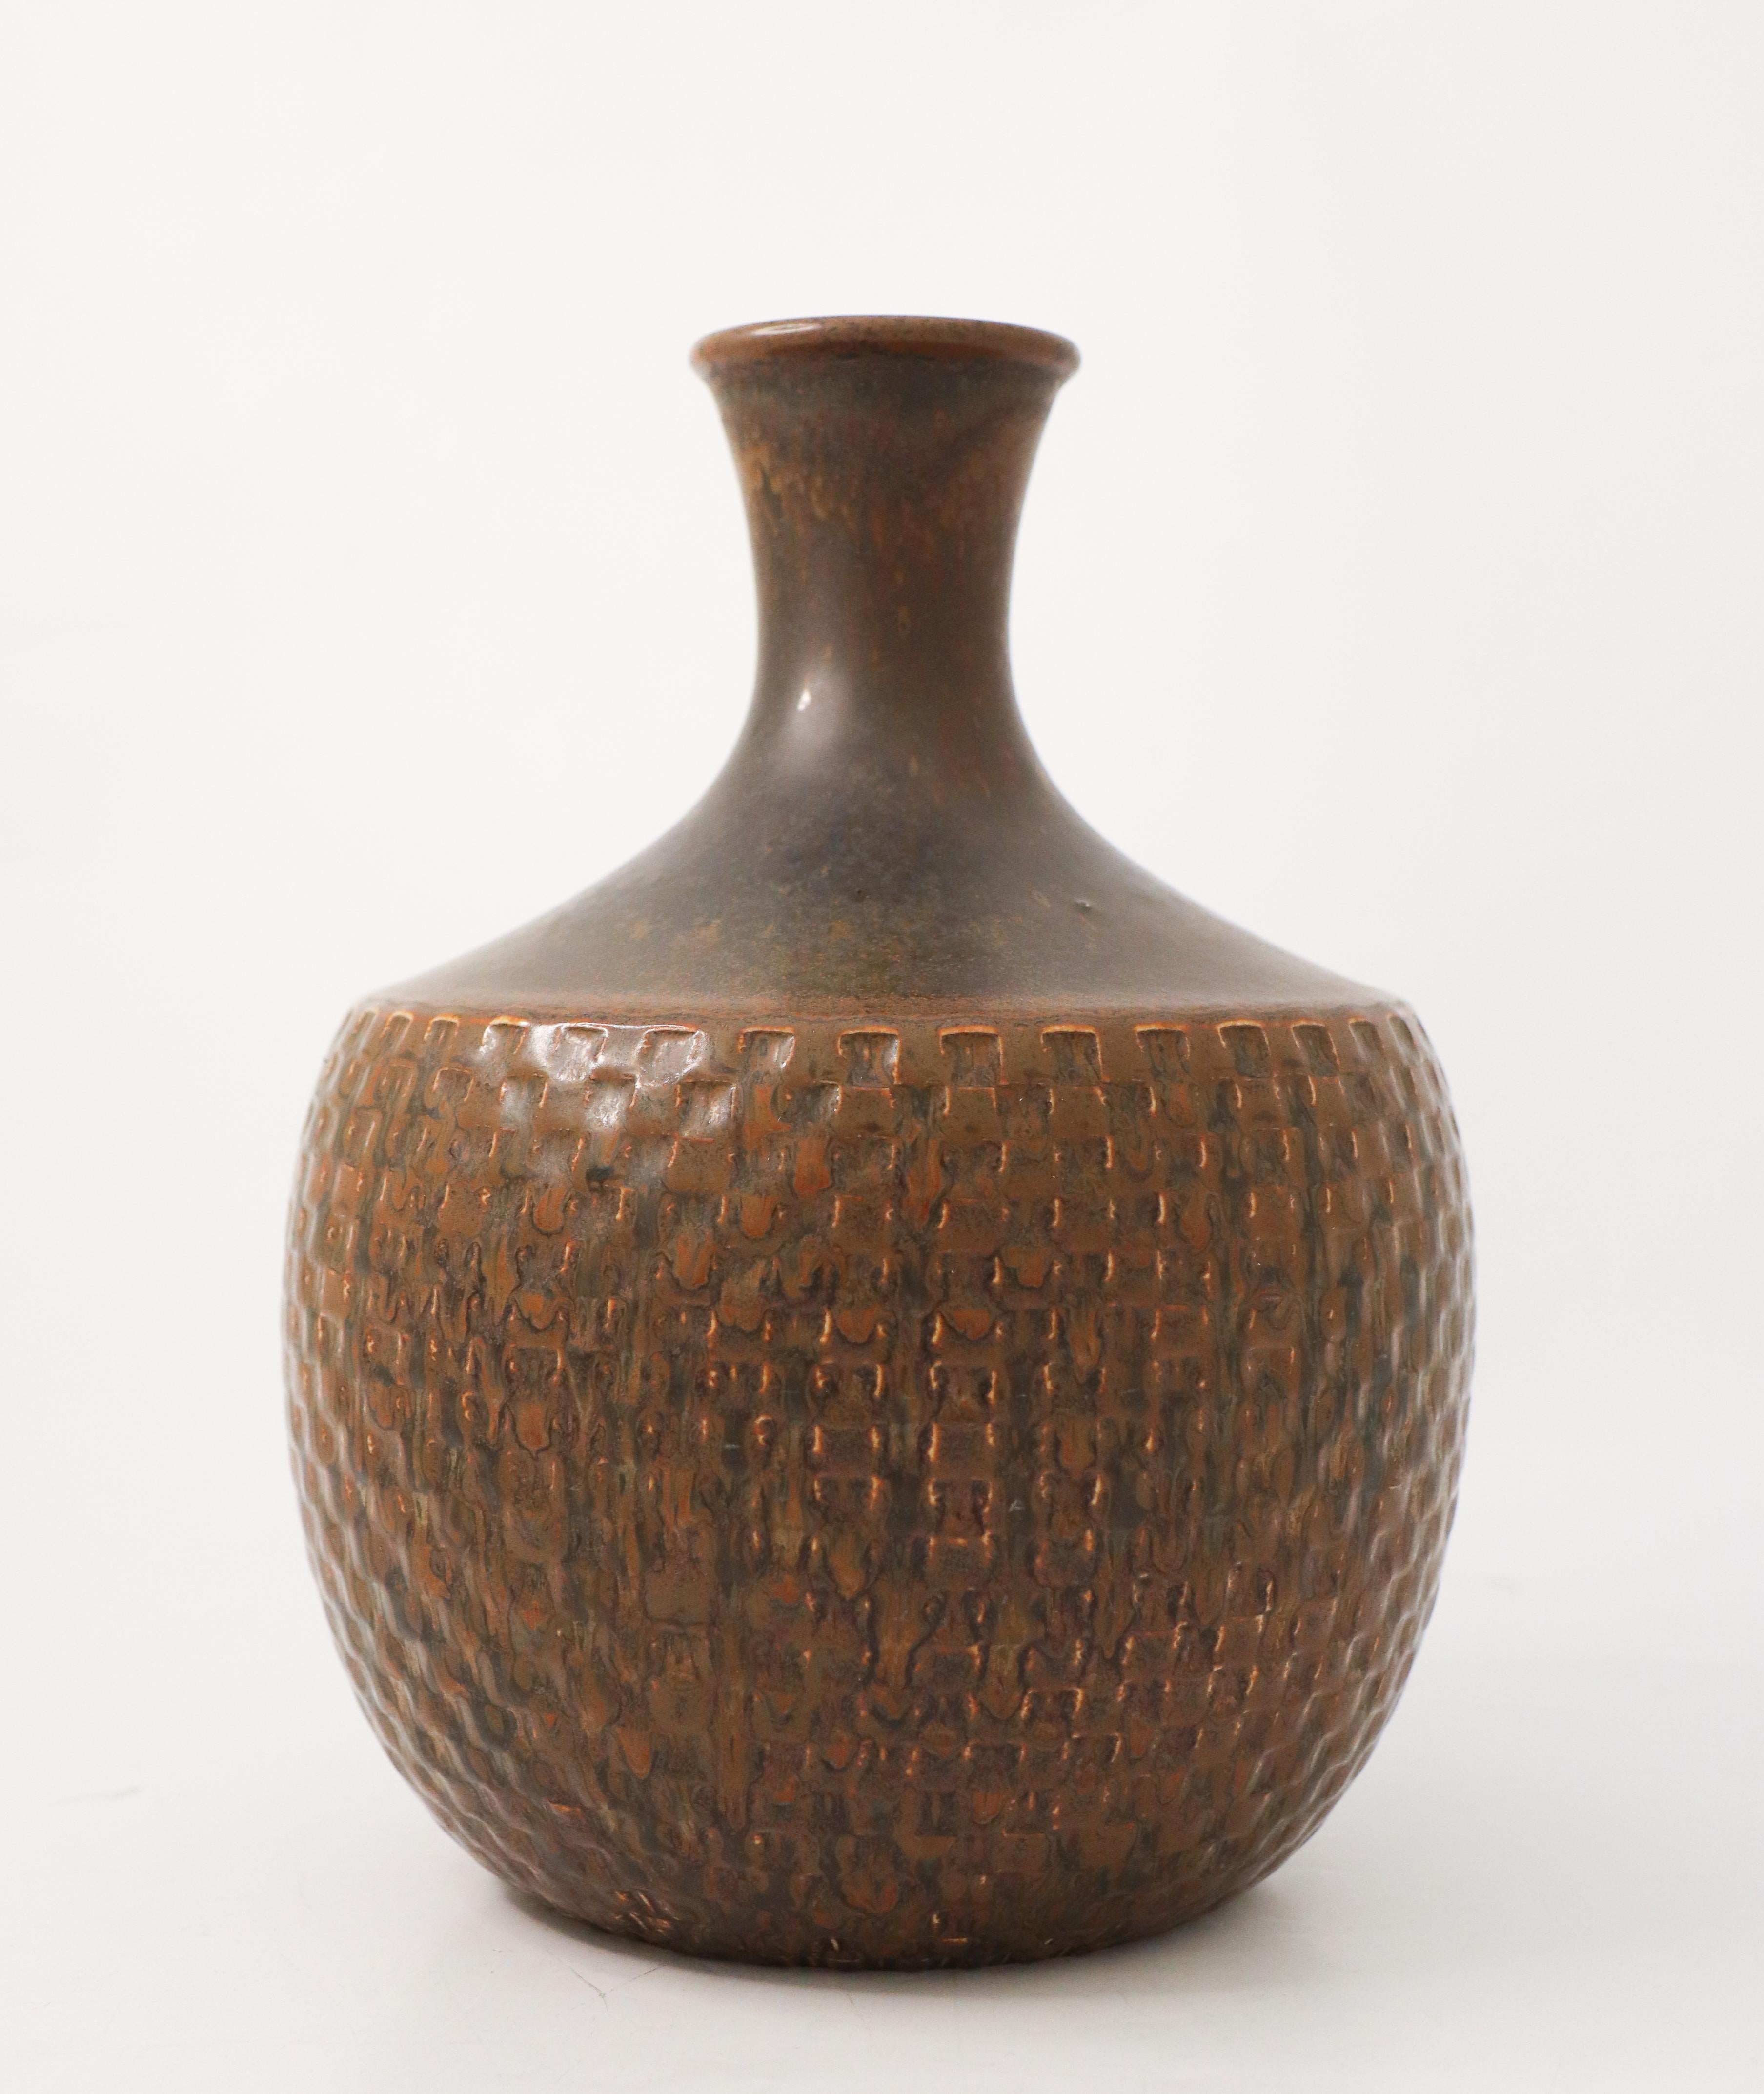 A large brown stoneware vase with a relief decor designed by Stig Lindberg at Gustavsberg. It is 22 cm high and in very good condition. This vase was designed in 1963.